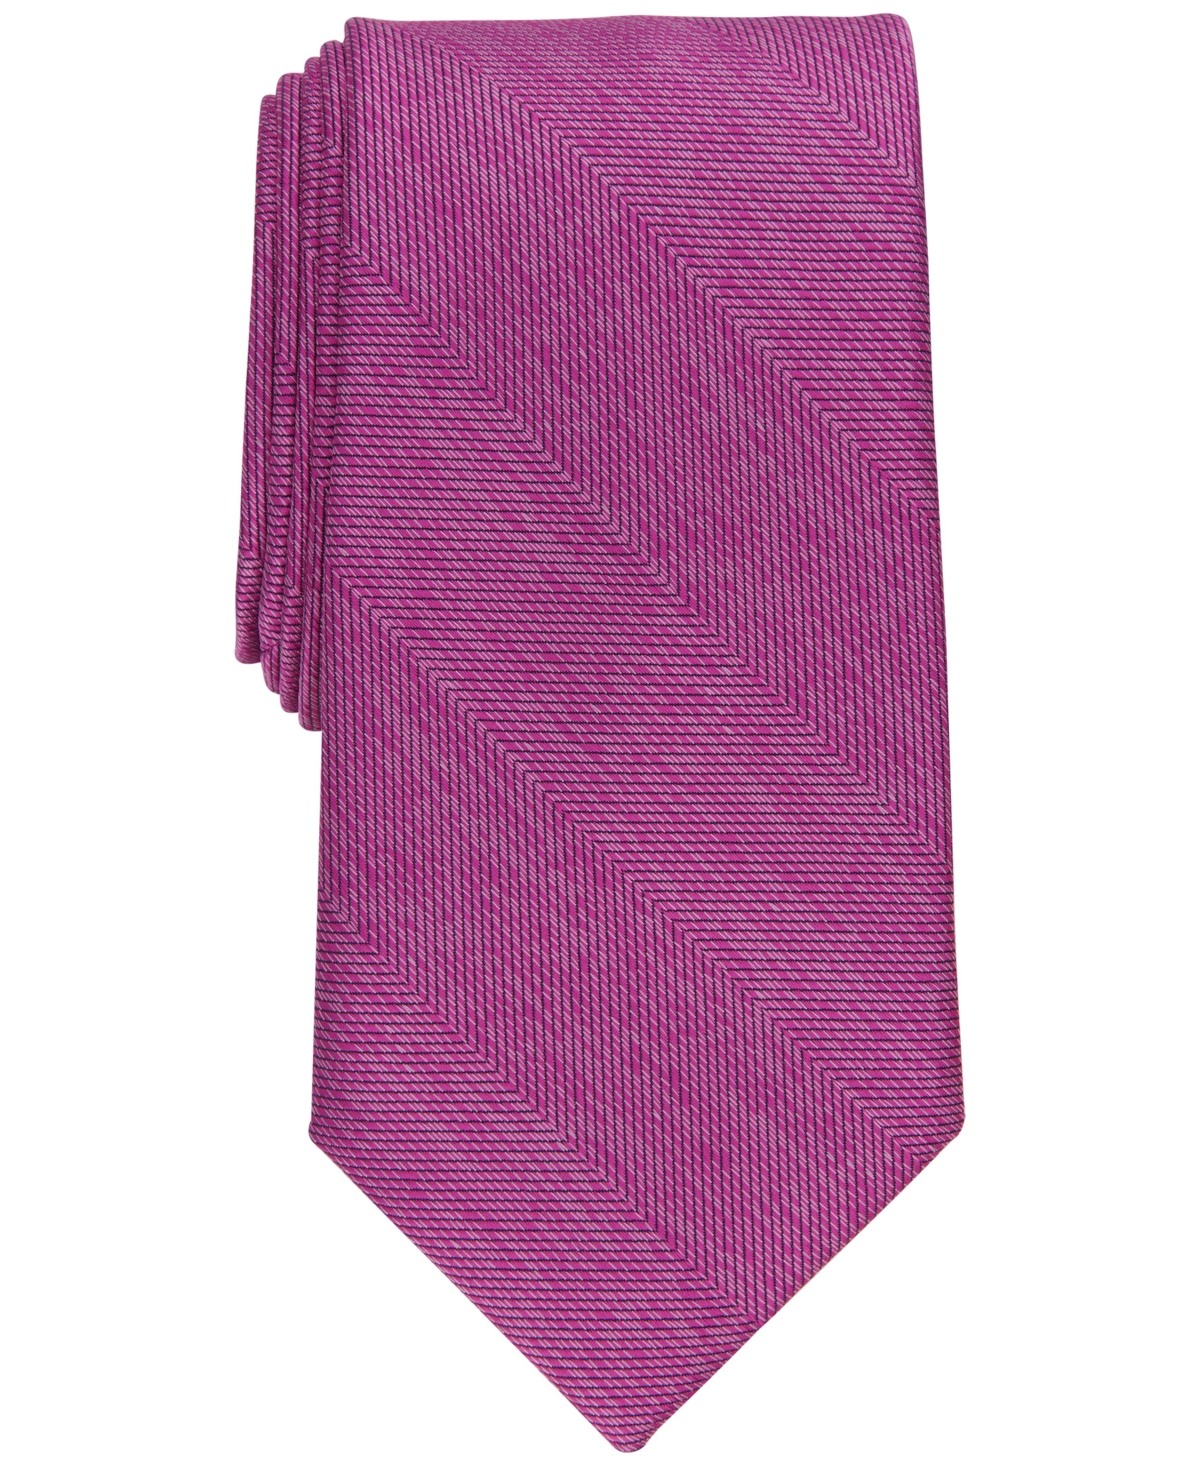 Men's Patel Solid Tie, Created for Macy's - Rose